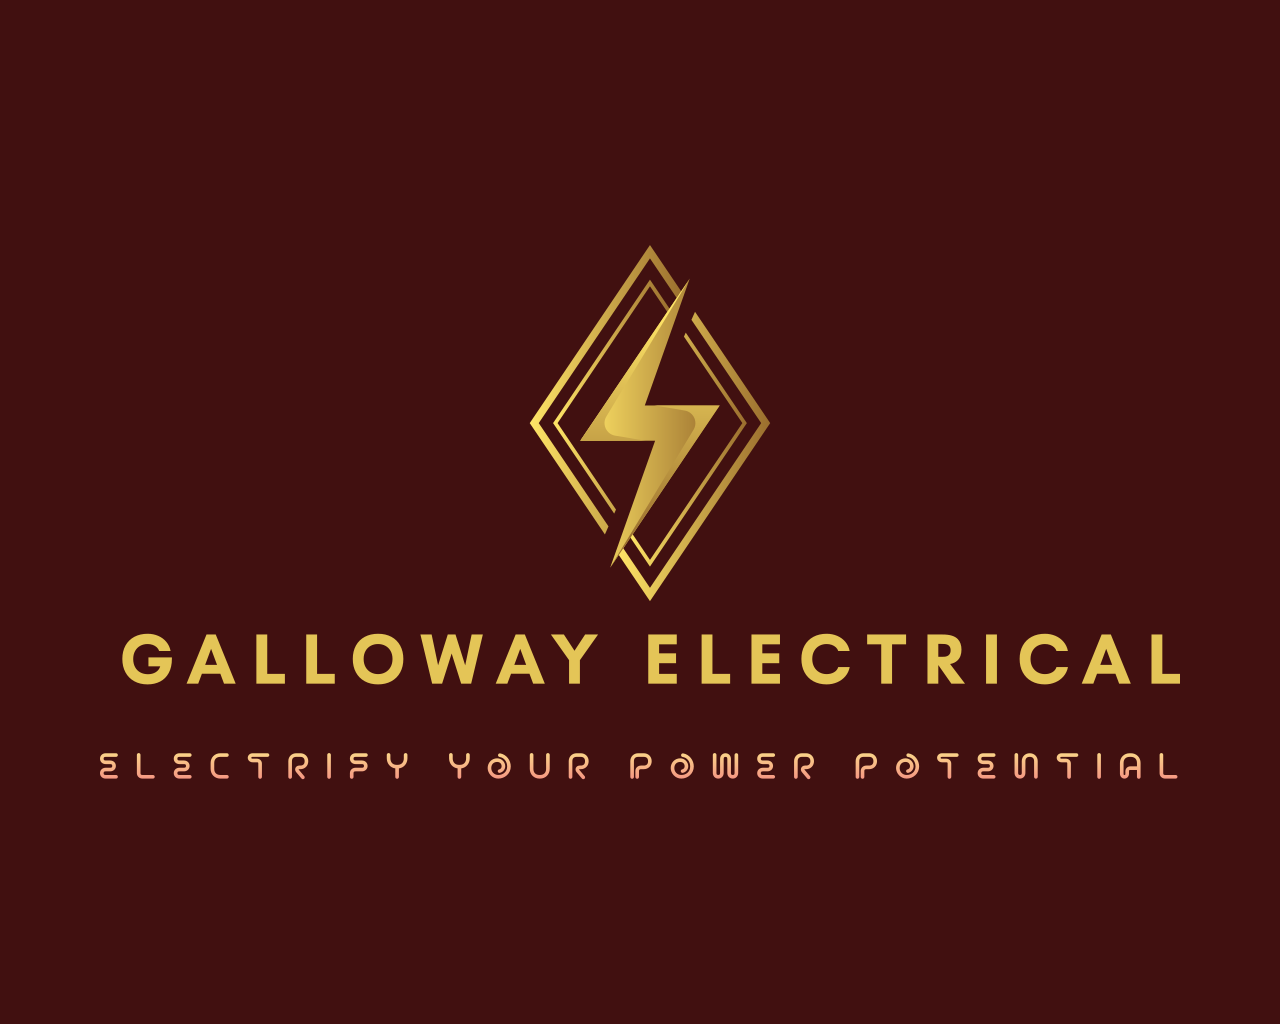 https://brand.page/galloway-electrical's logo